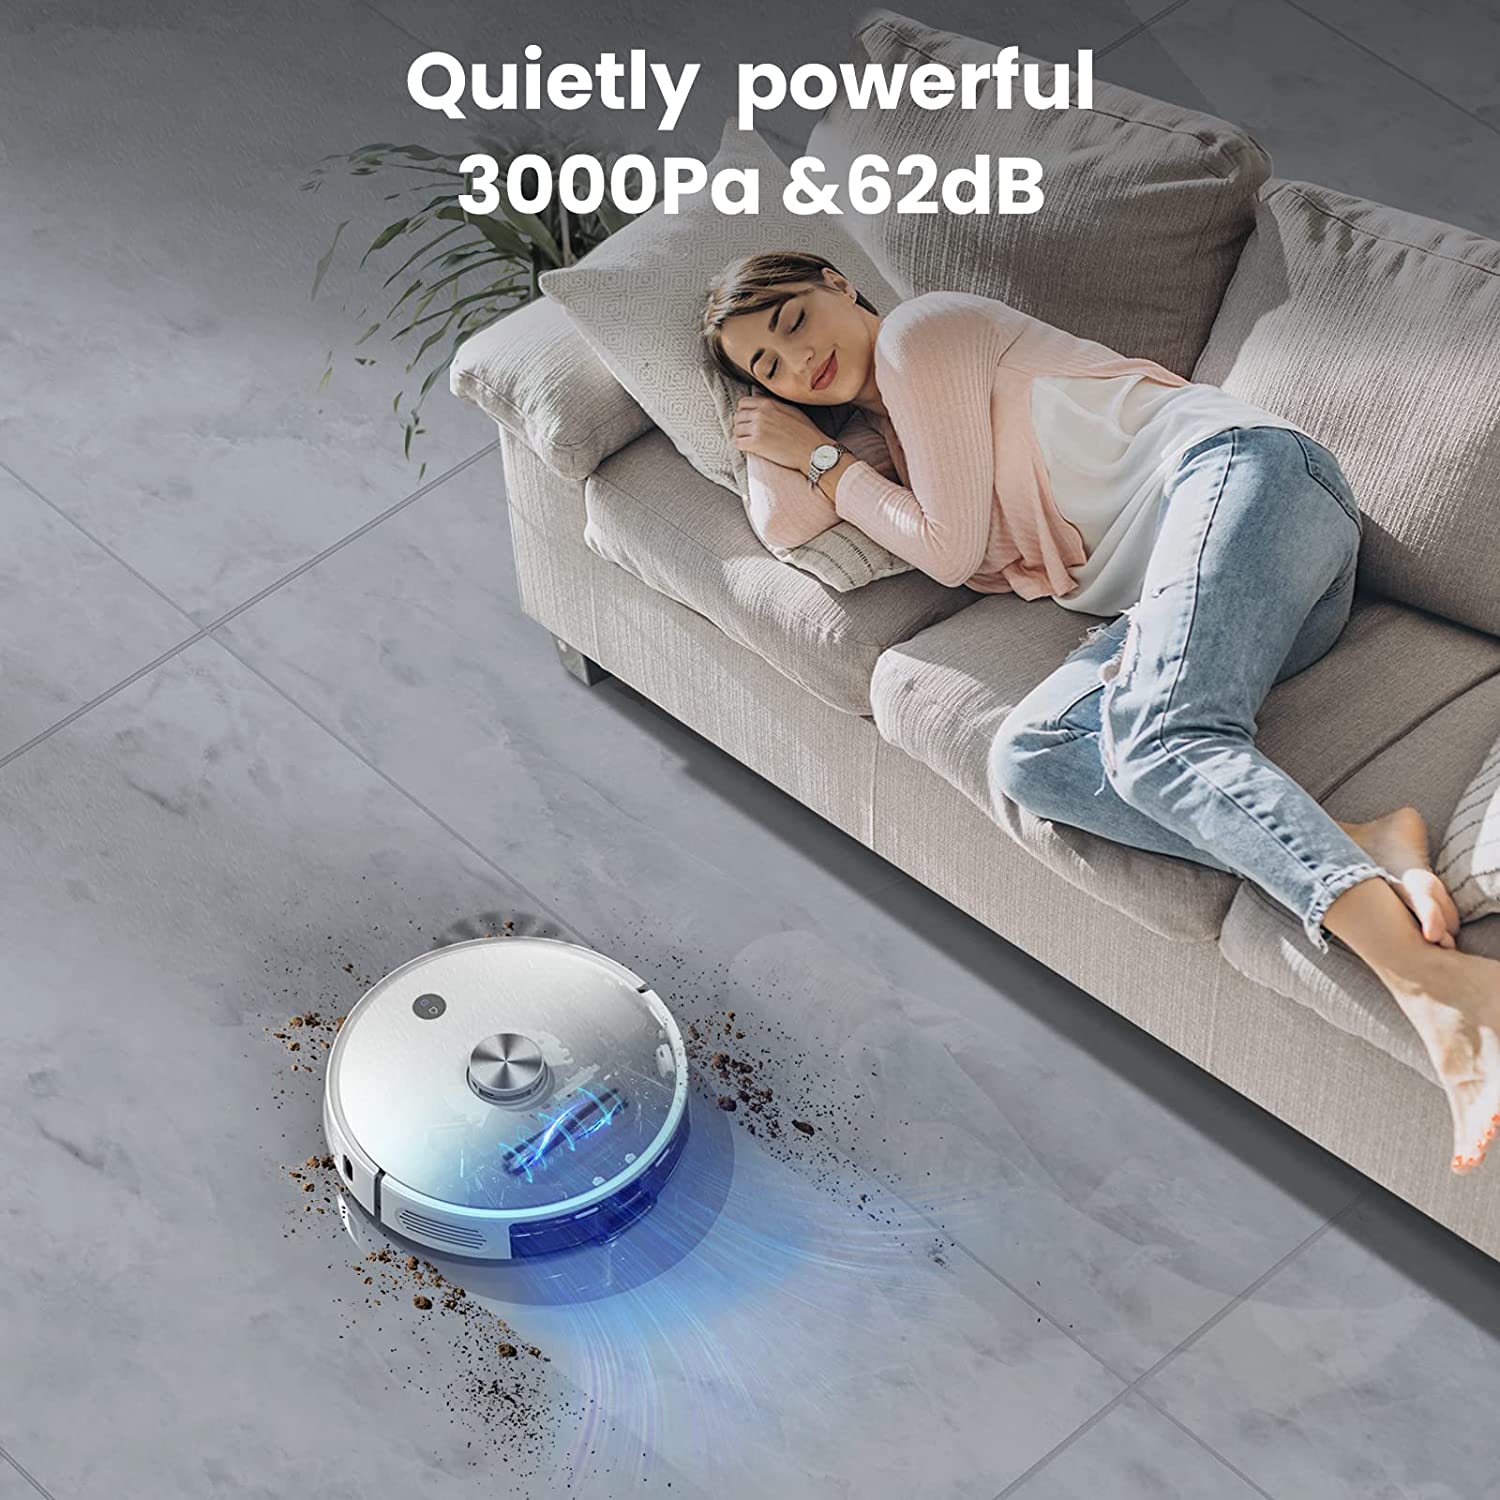 Self Cleaning Vacuum Cleaner Honiture Robot Vacuum Cleaner 4000pa Suction 3  In 1 Sweeping Mop For Carpet Self Charging APP Voice Control Smart Home  Appliance Q231020 From Ethereall, $91.21